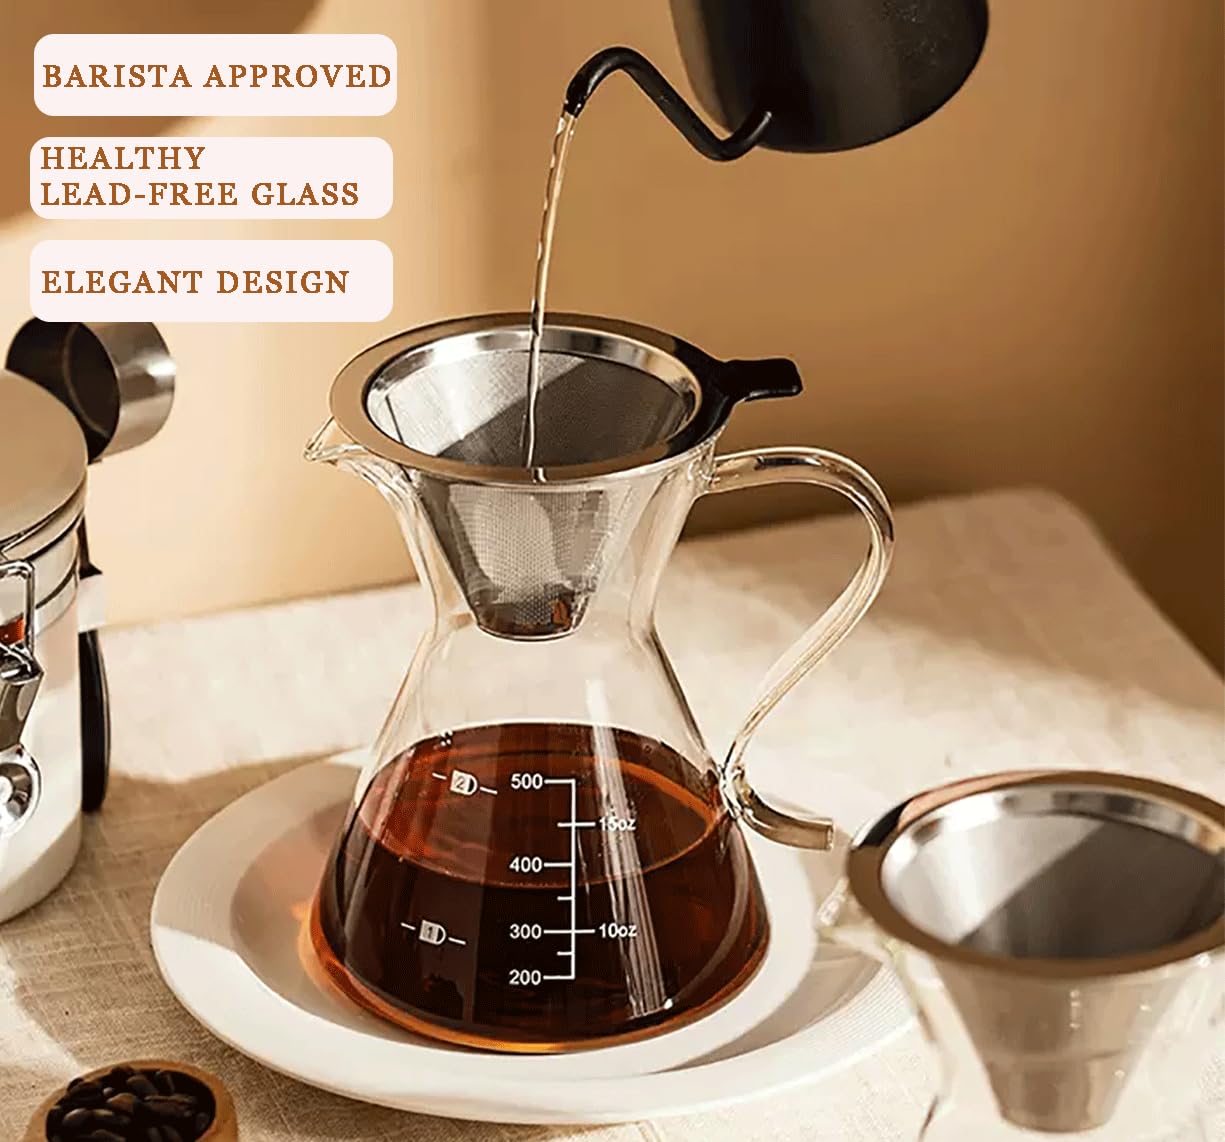 COFISUKI Pour Over Coffee Maker - Elegant Drip Coffee Maker with Reusable Stainless Steel Filter/Dripper, Lead-Free Borosilicate Glass Coffee Carafe for 1-4Cup (500ml/17oz)